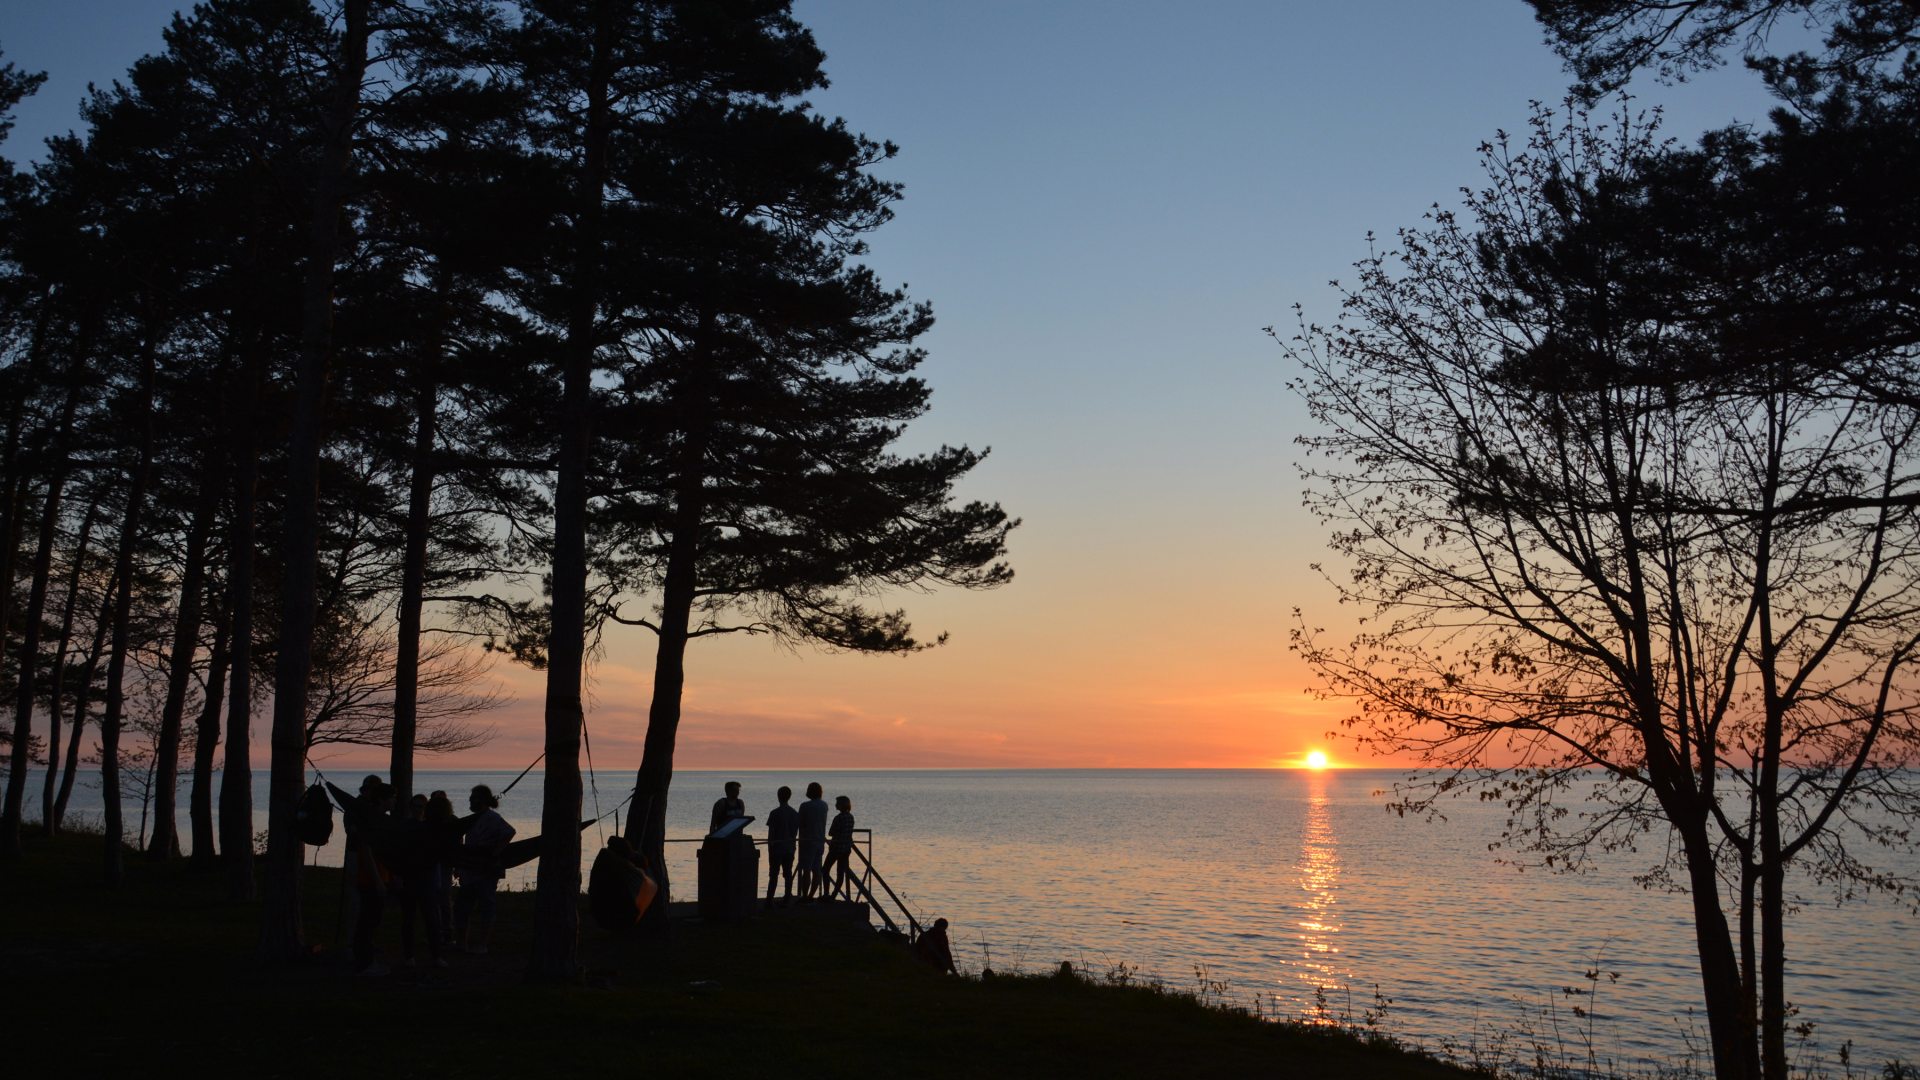 Students watching sunset over lake ontario